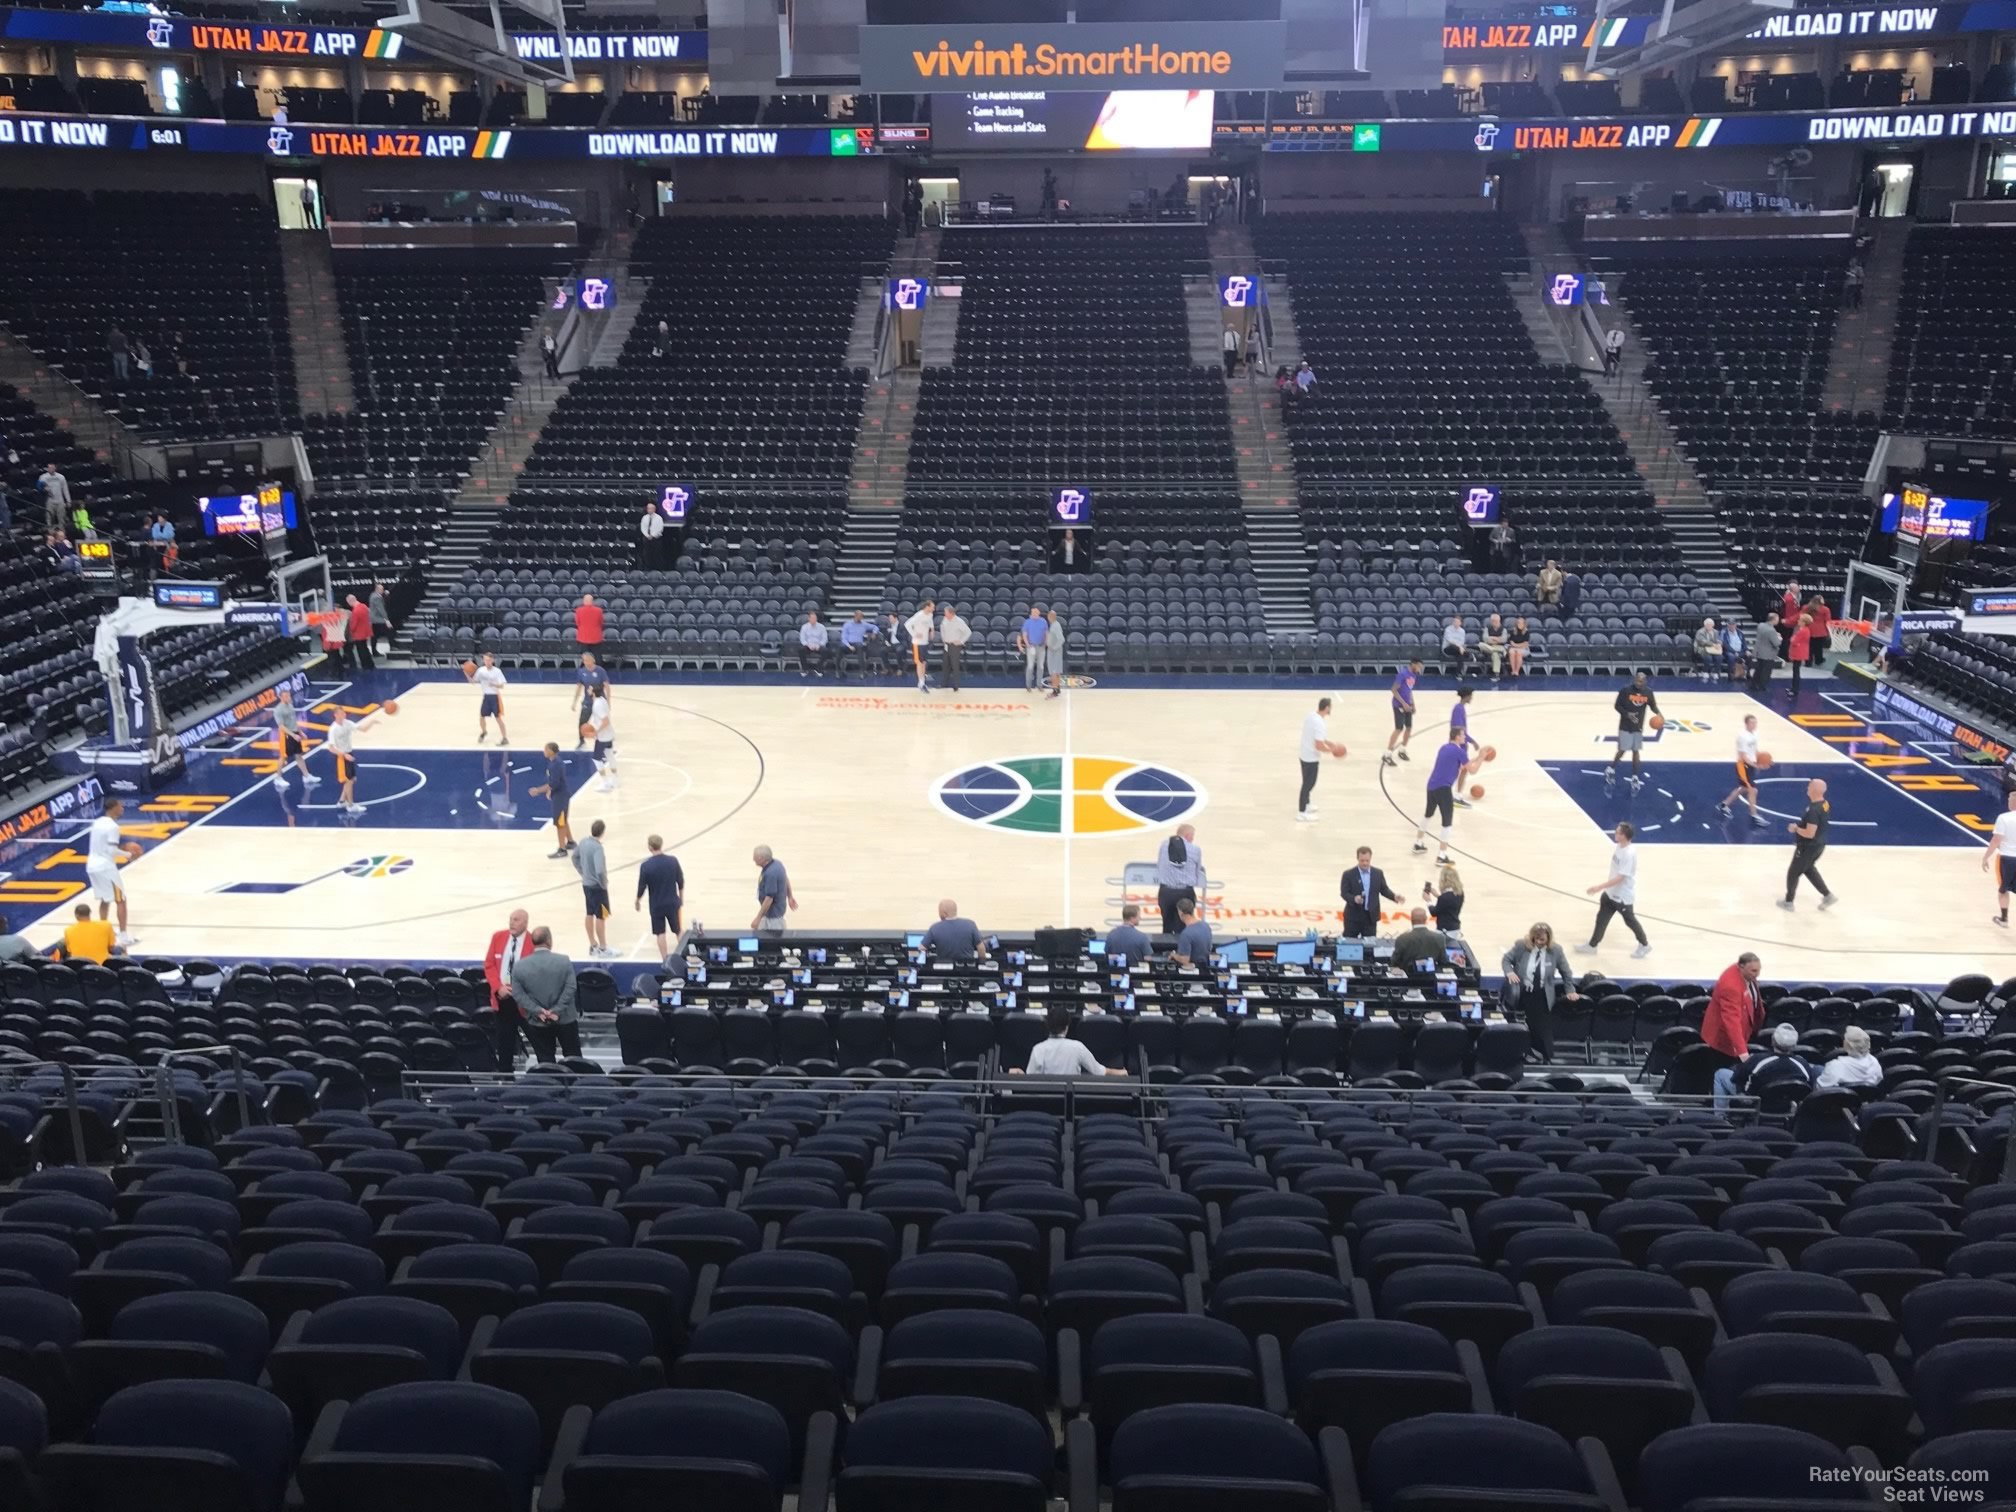 section 7, row 20 seat view  for basketball - delta center